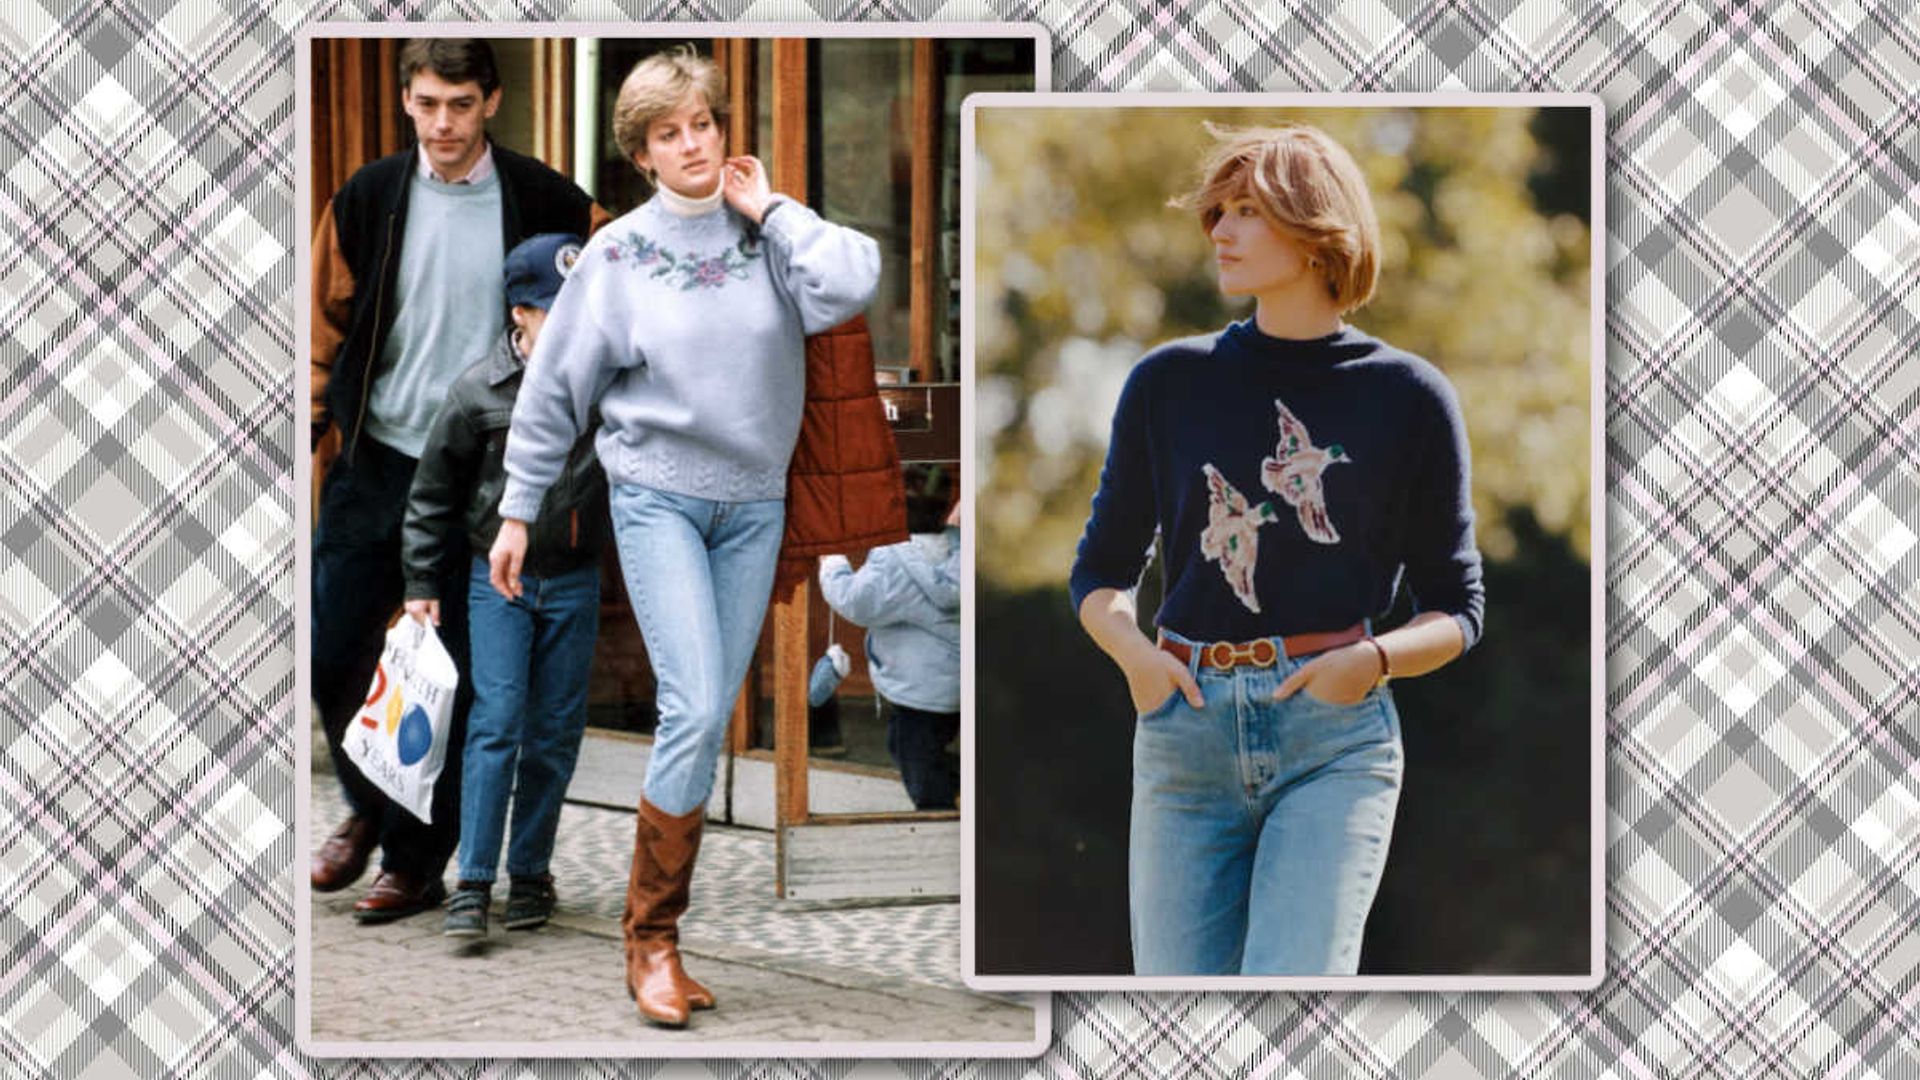 Anthropologie's new collection has Princess Diana written all over it - and it's selling out fast